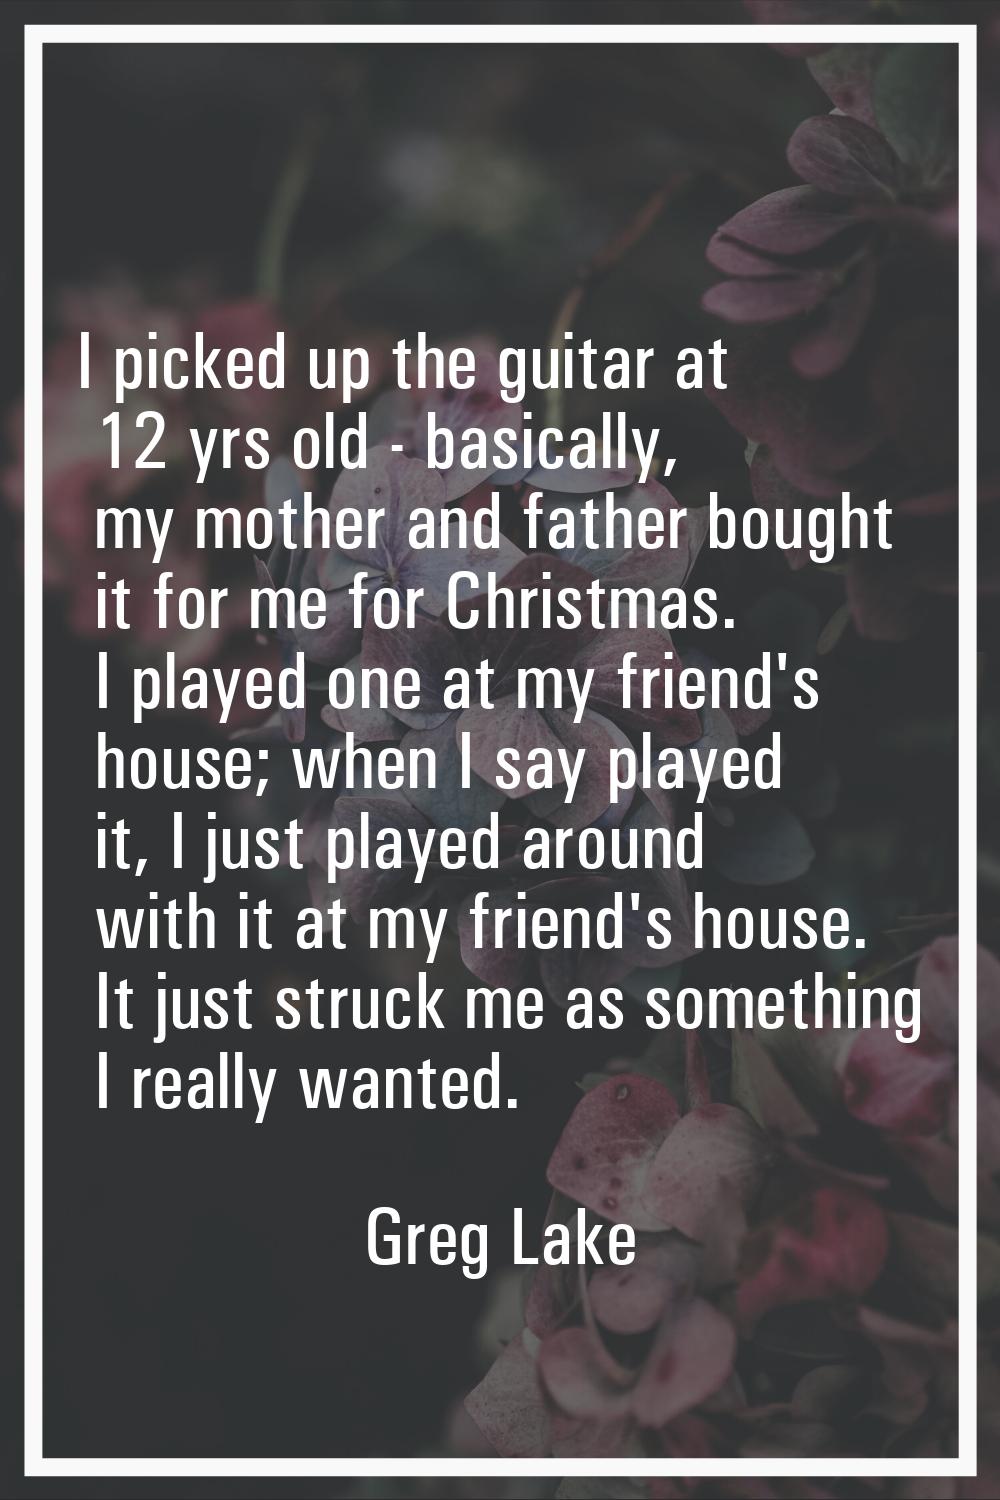 I picked up the guitar at 12 yrs old - basically, my mother and father bought it for me for Christm